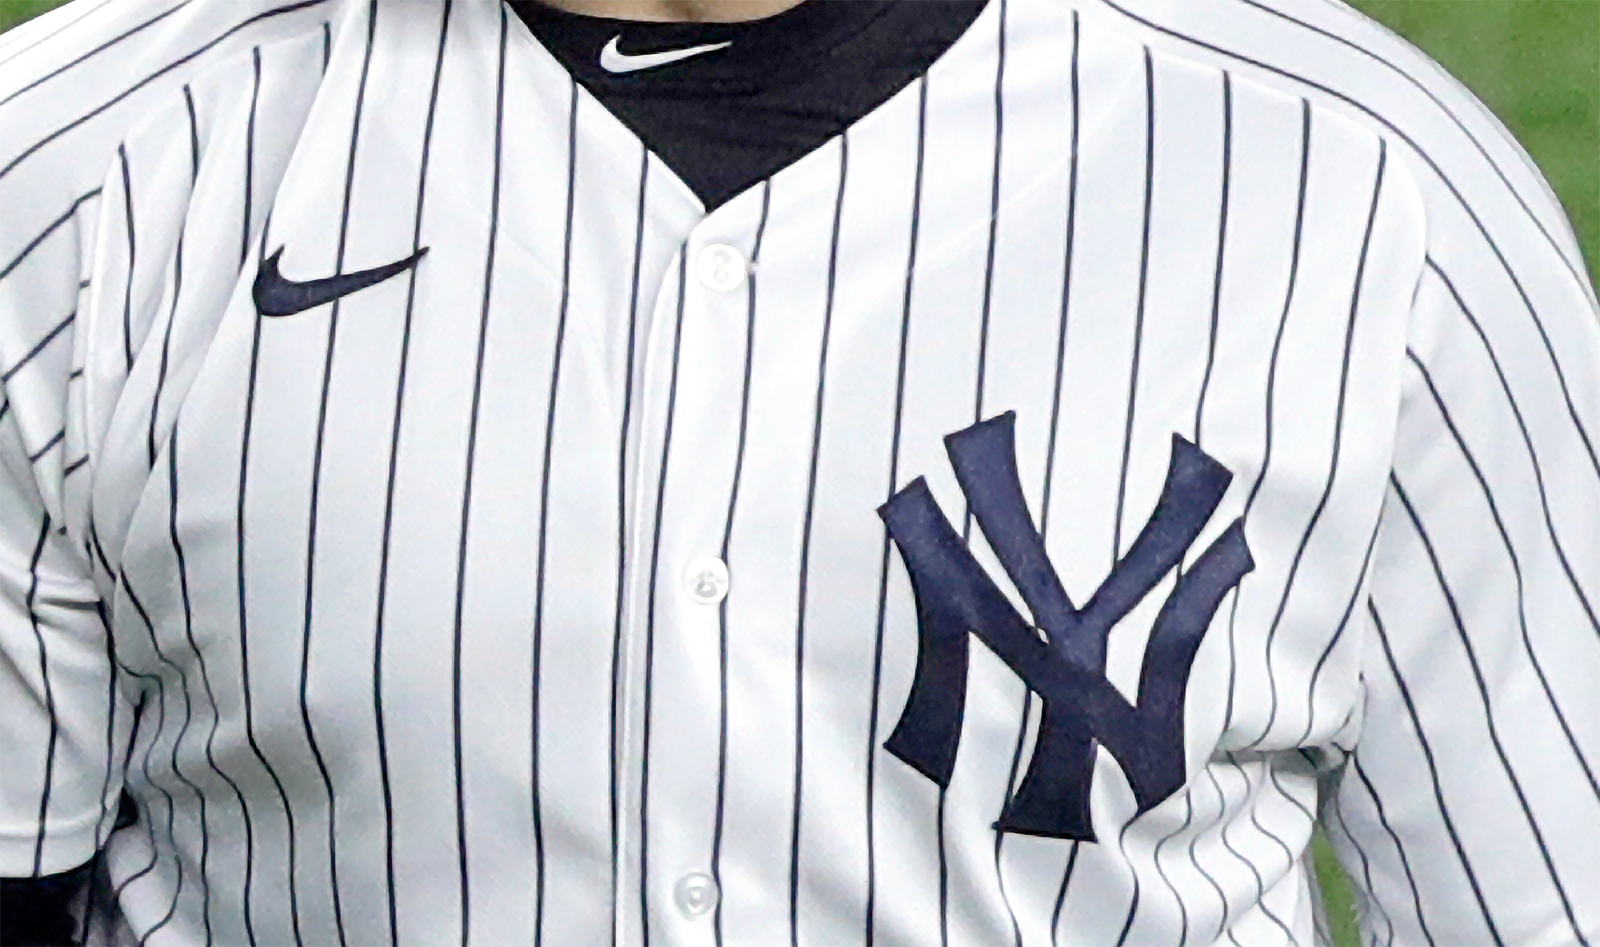 What is the New York Yankees jersey patch? Starr Insurance added